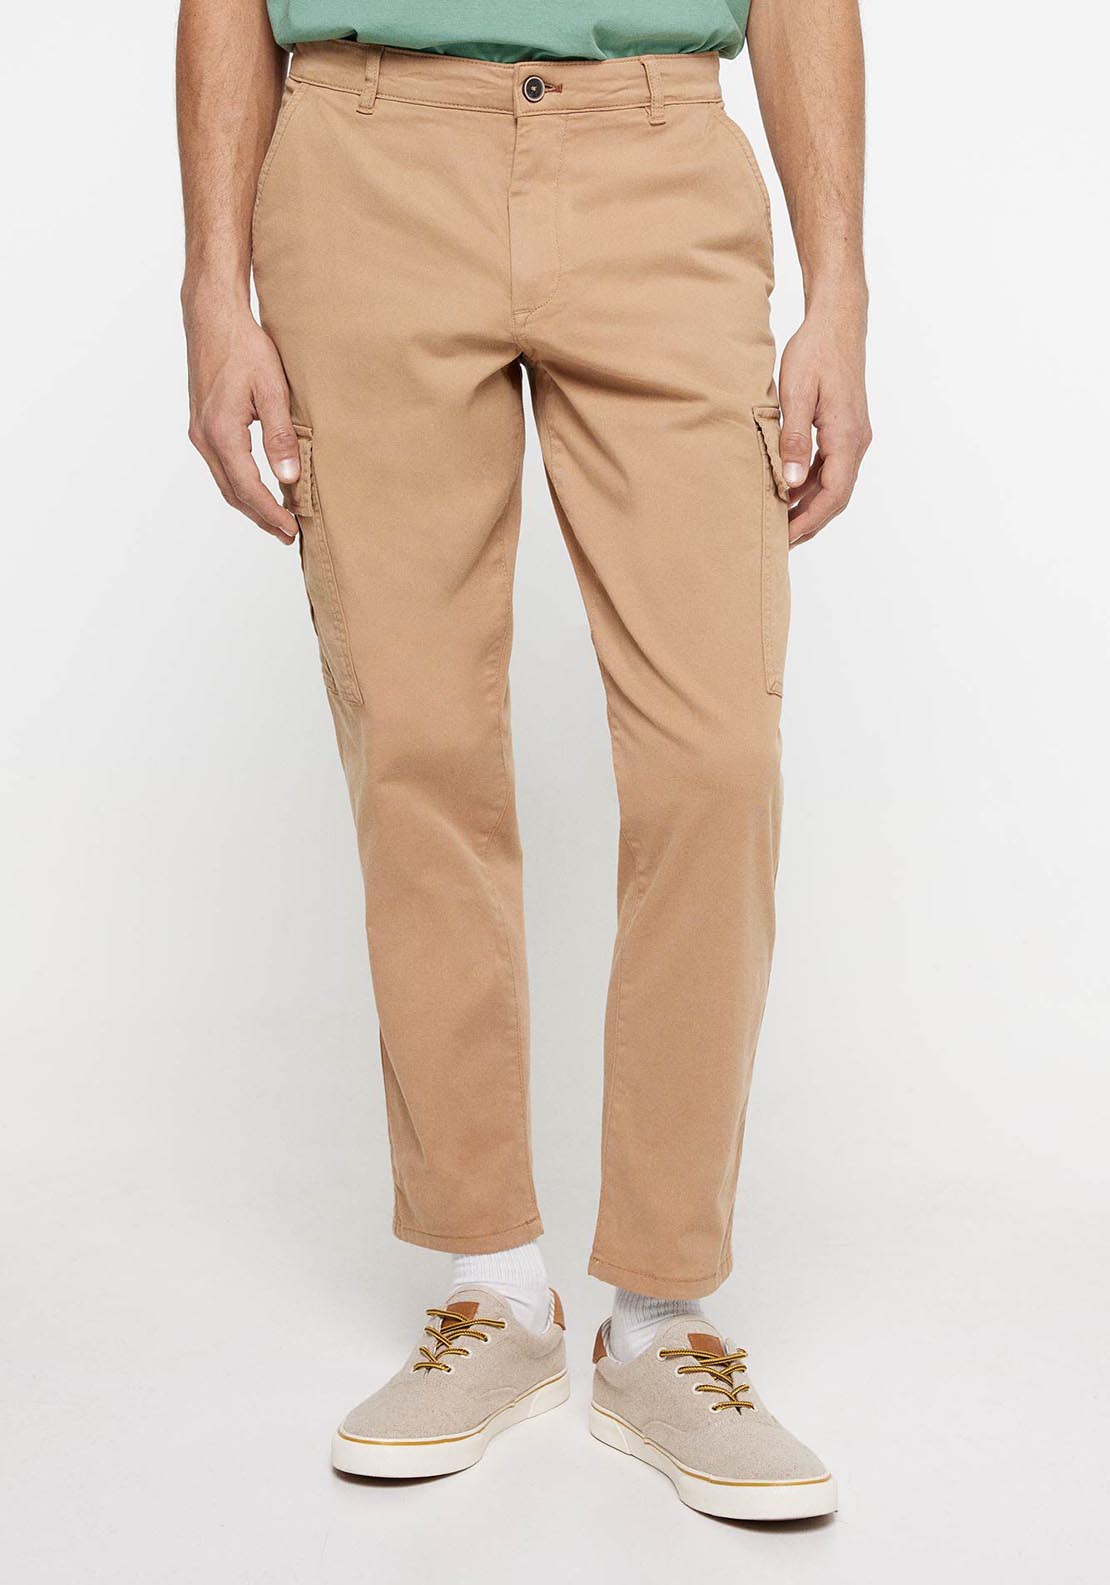 Springfield Cargo trousers - Blue / Camel 1 Shaws Department Stores